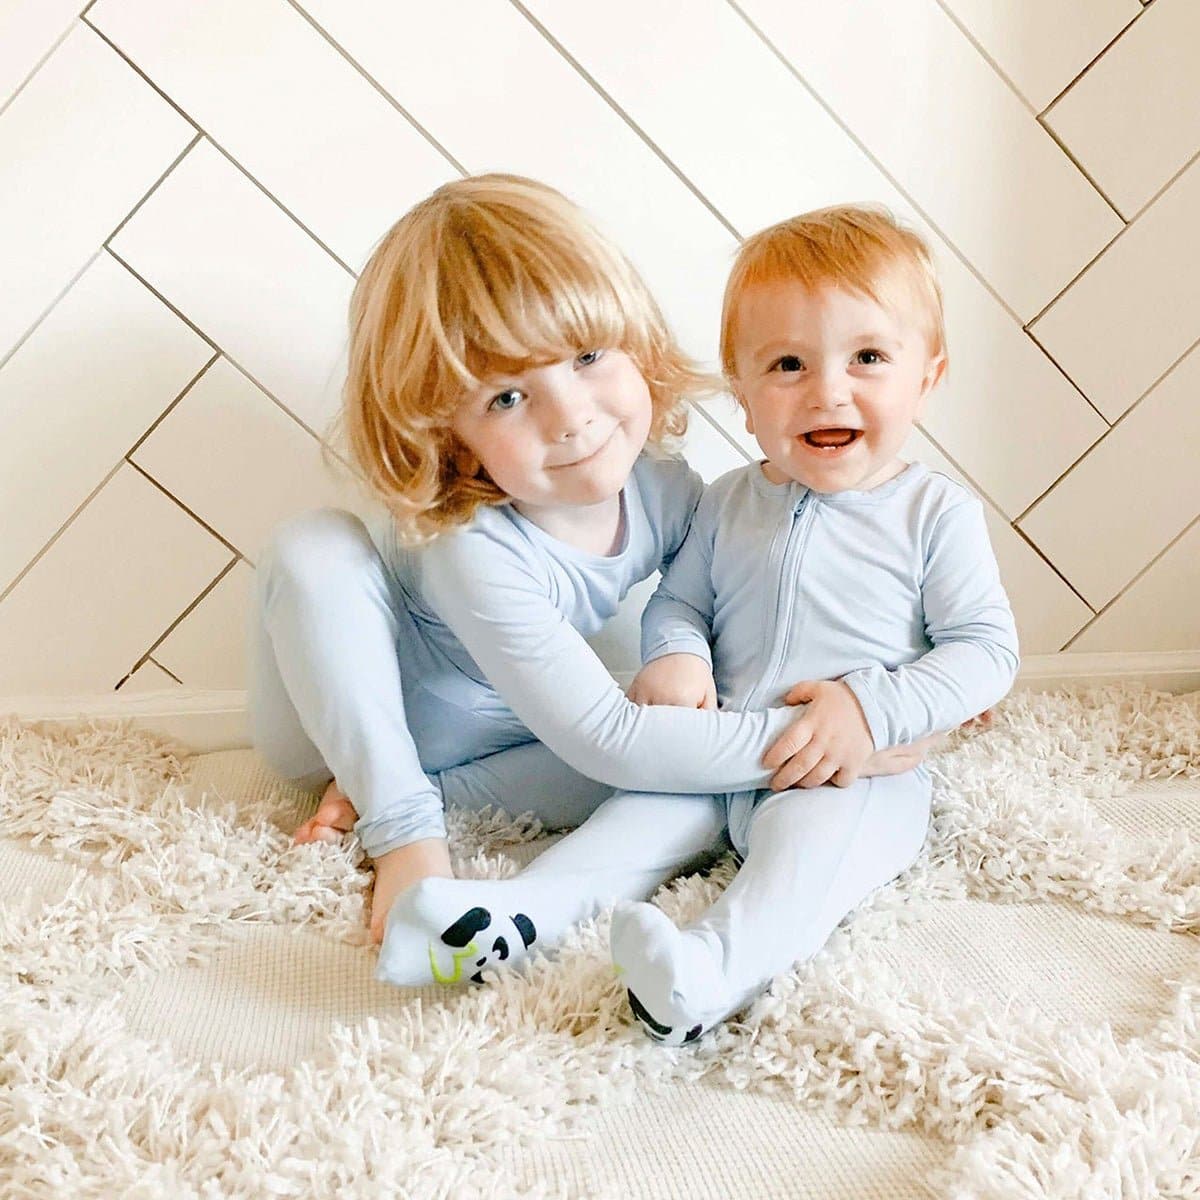 Why Bamboo Viscose Pajamas Are The Best For Eczema & Sensitive Skin –  Little Sleepies